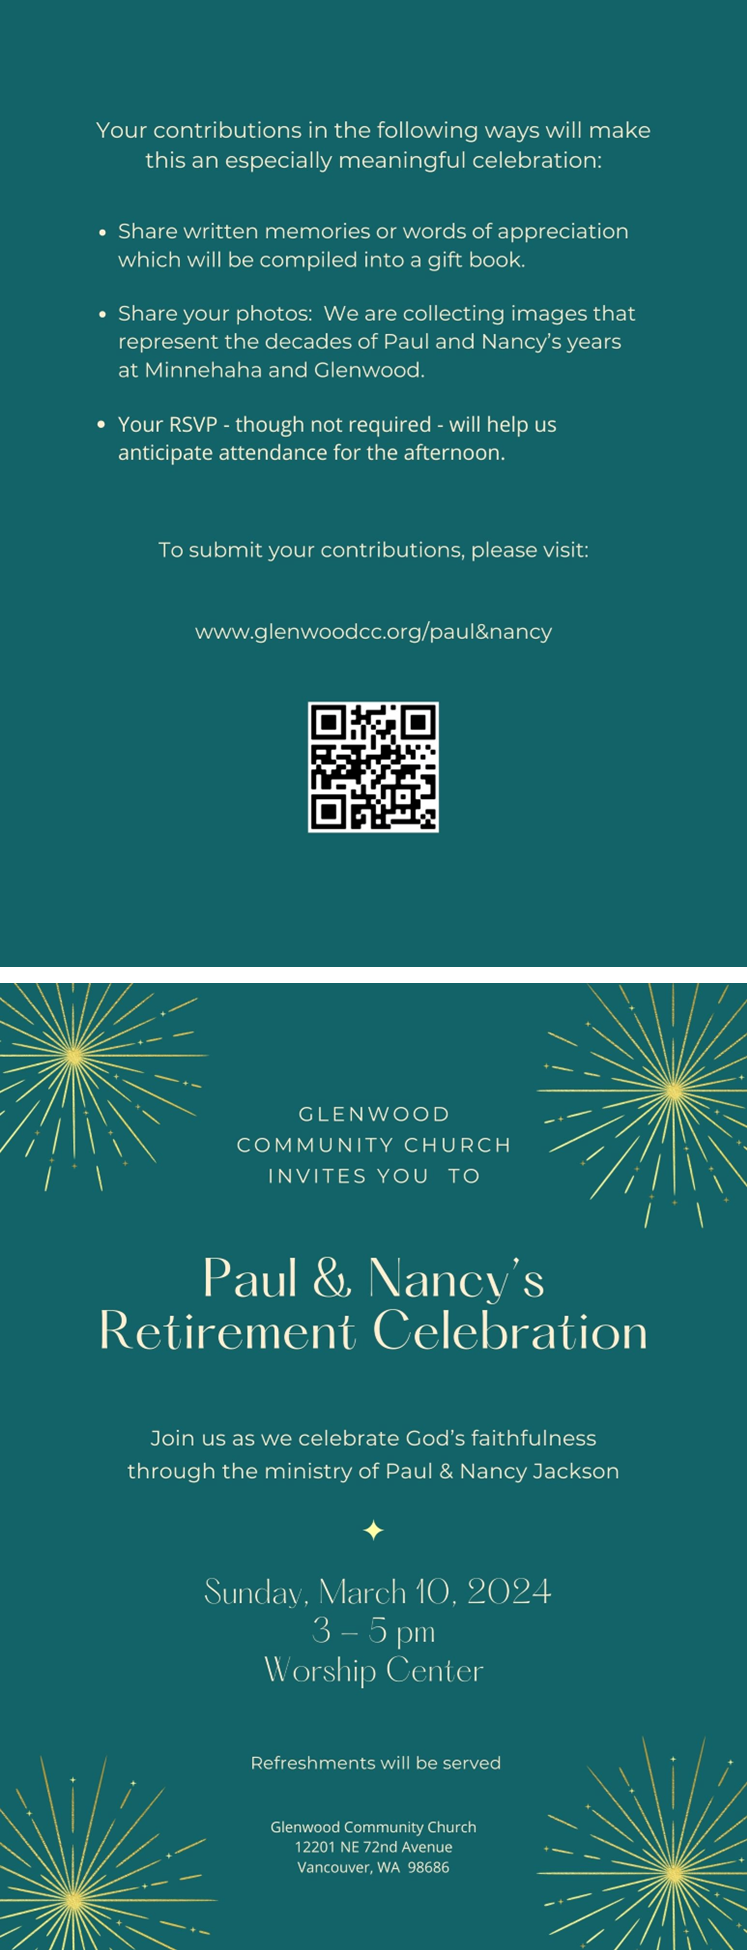 Glenwood community Church Invites you to Paul & Nancy’s Retirement Celebration. Join us as we celebrate God’s faithfulness through the ministry of Paul & Nancy Jackson Sunday, March 10, 2024 3 - 5 pm Worship Center.  Refreshments will be served.